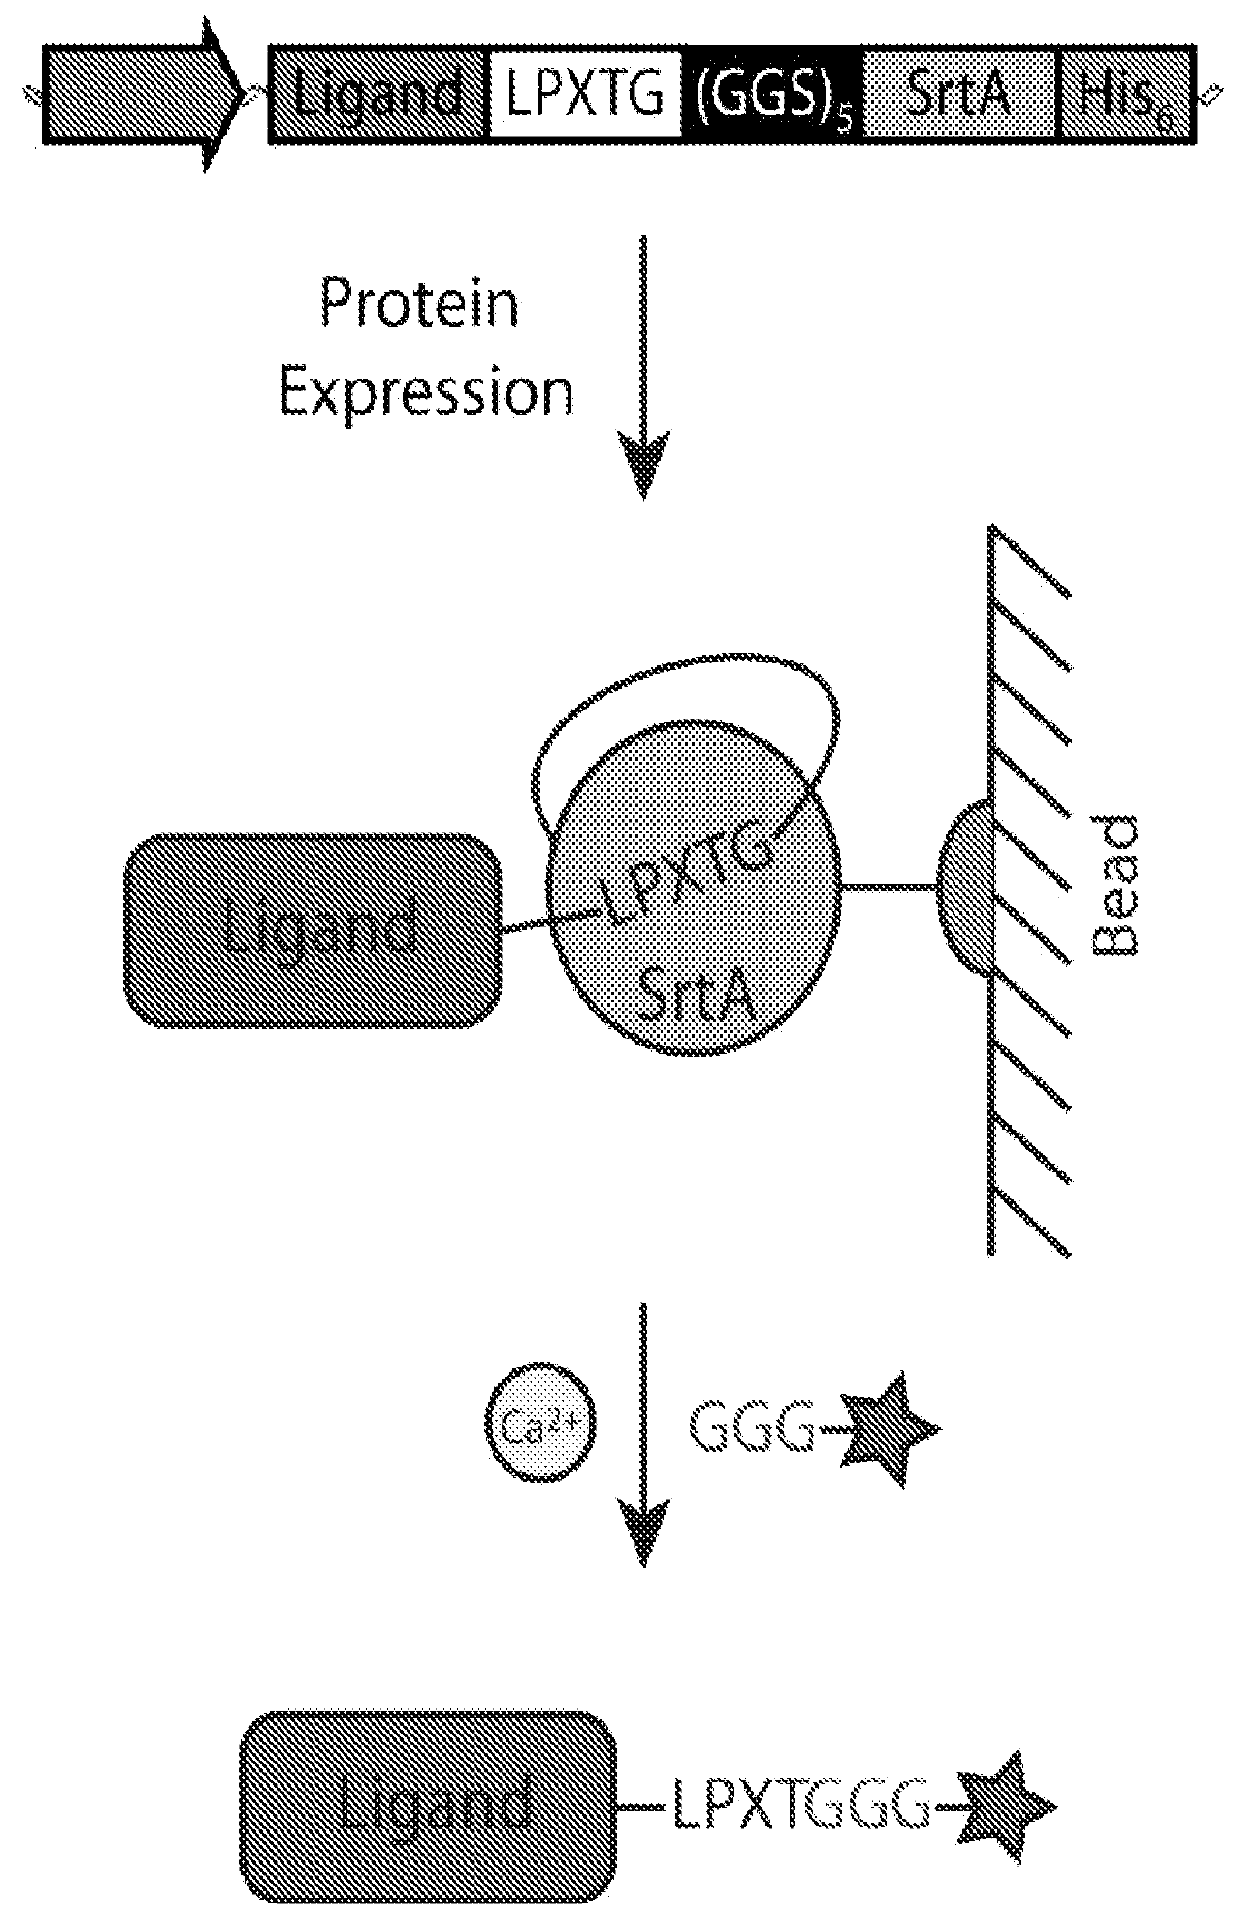 Sortase-mediated protein purification and ligation